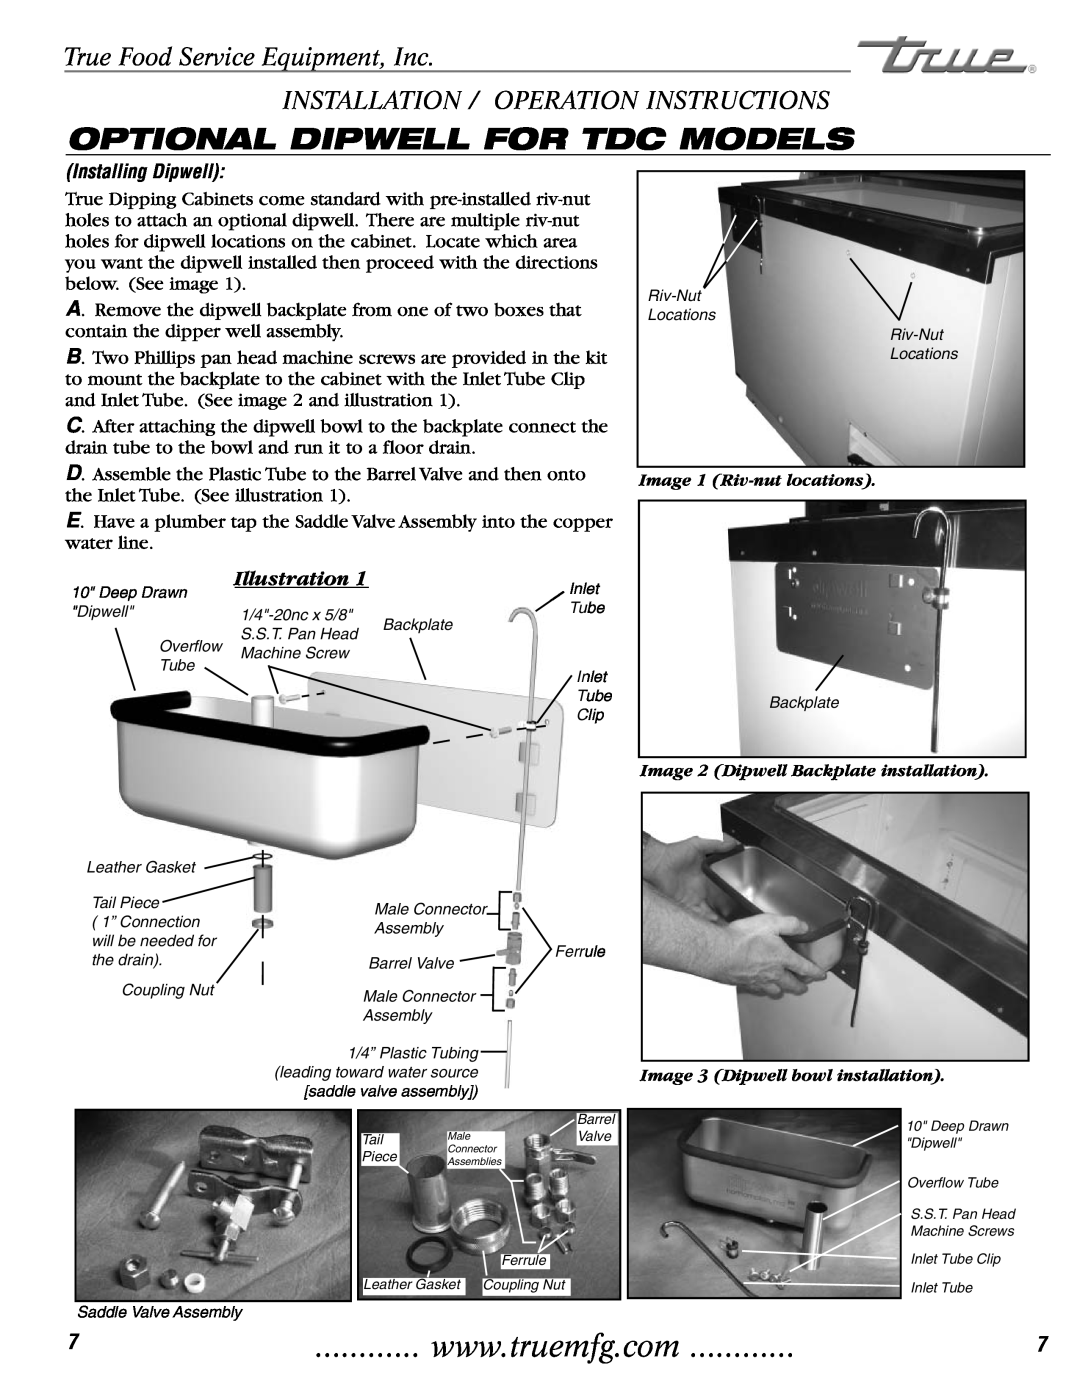 True Manufacturing Company THDC-6, TDC-47 Optional Dipwell For Tdc Models, Illustration, True Food Service Equipment, Inc 